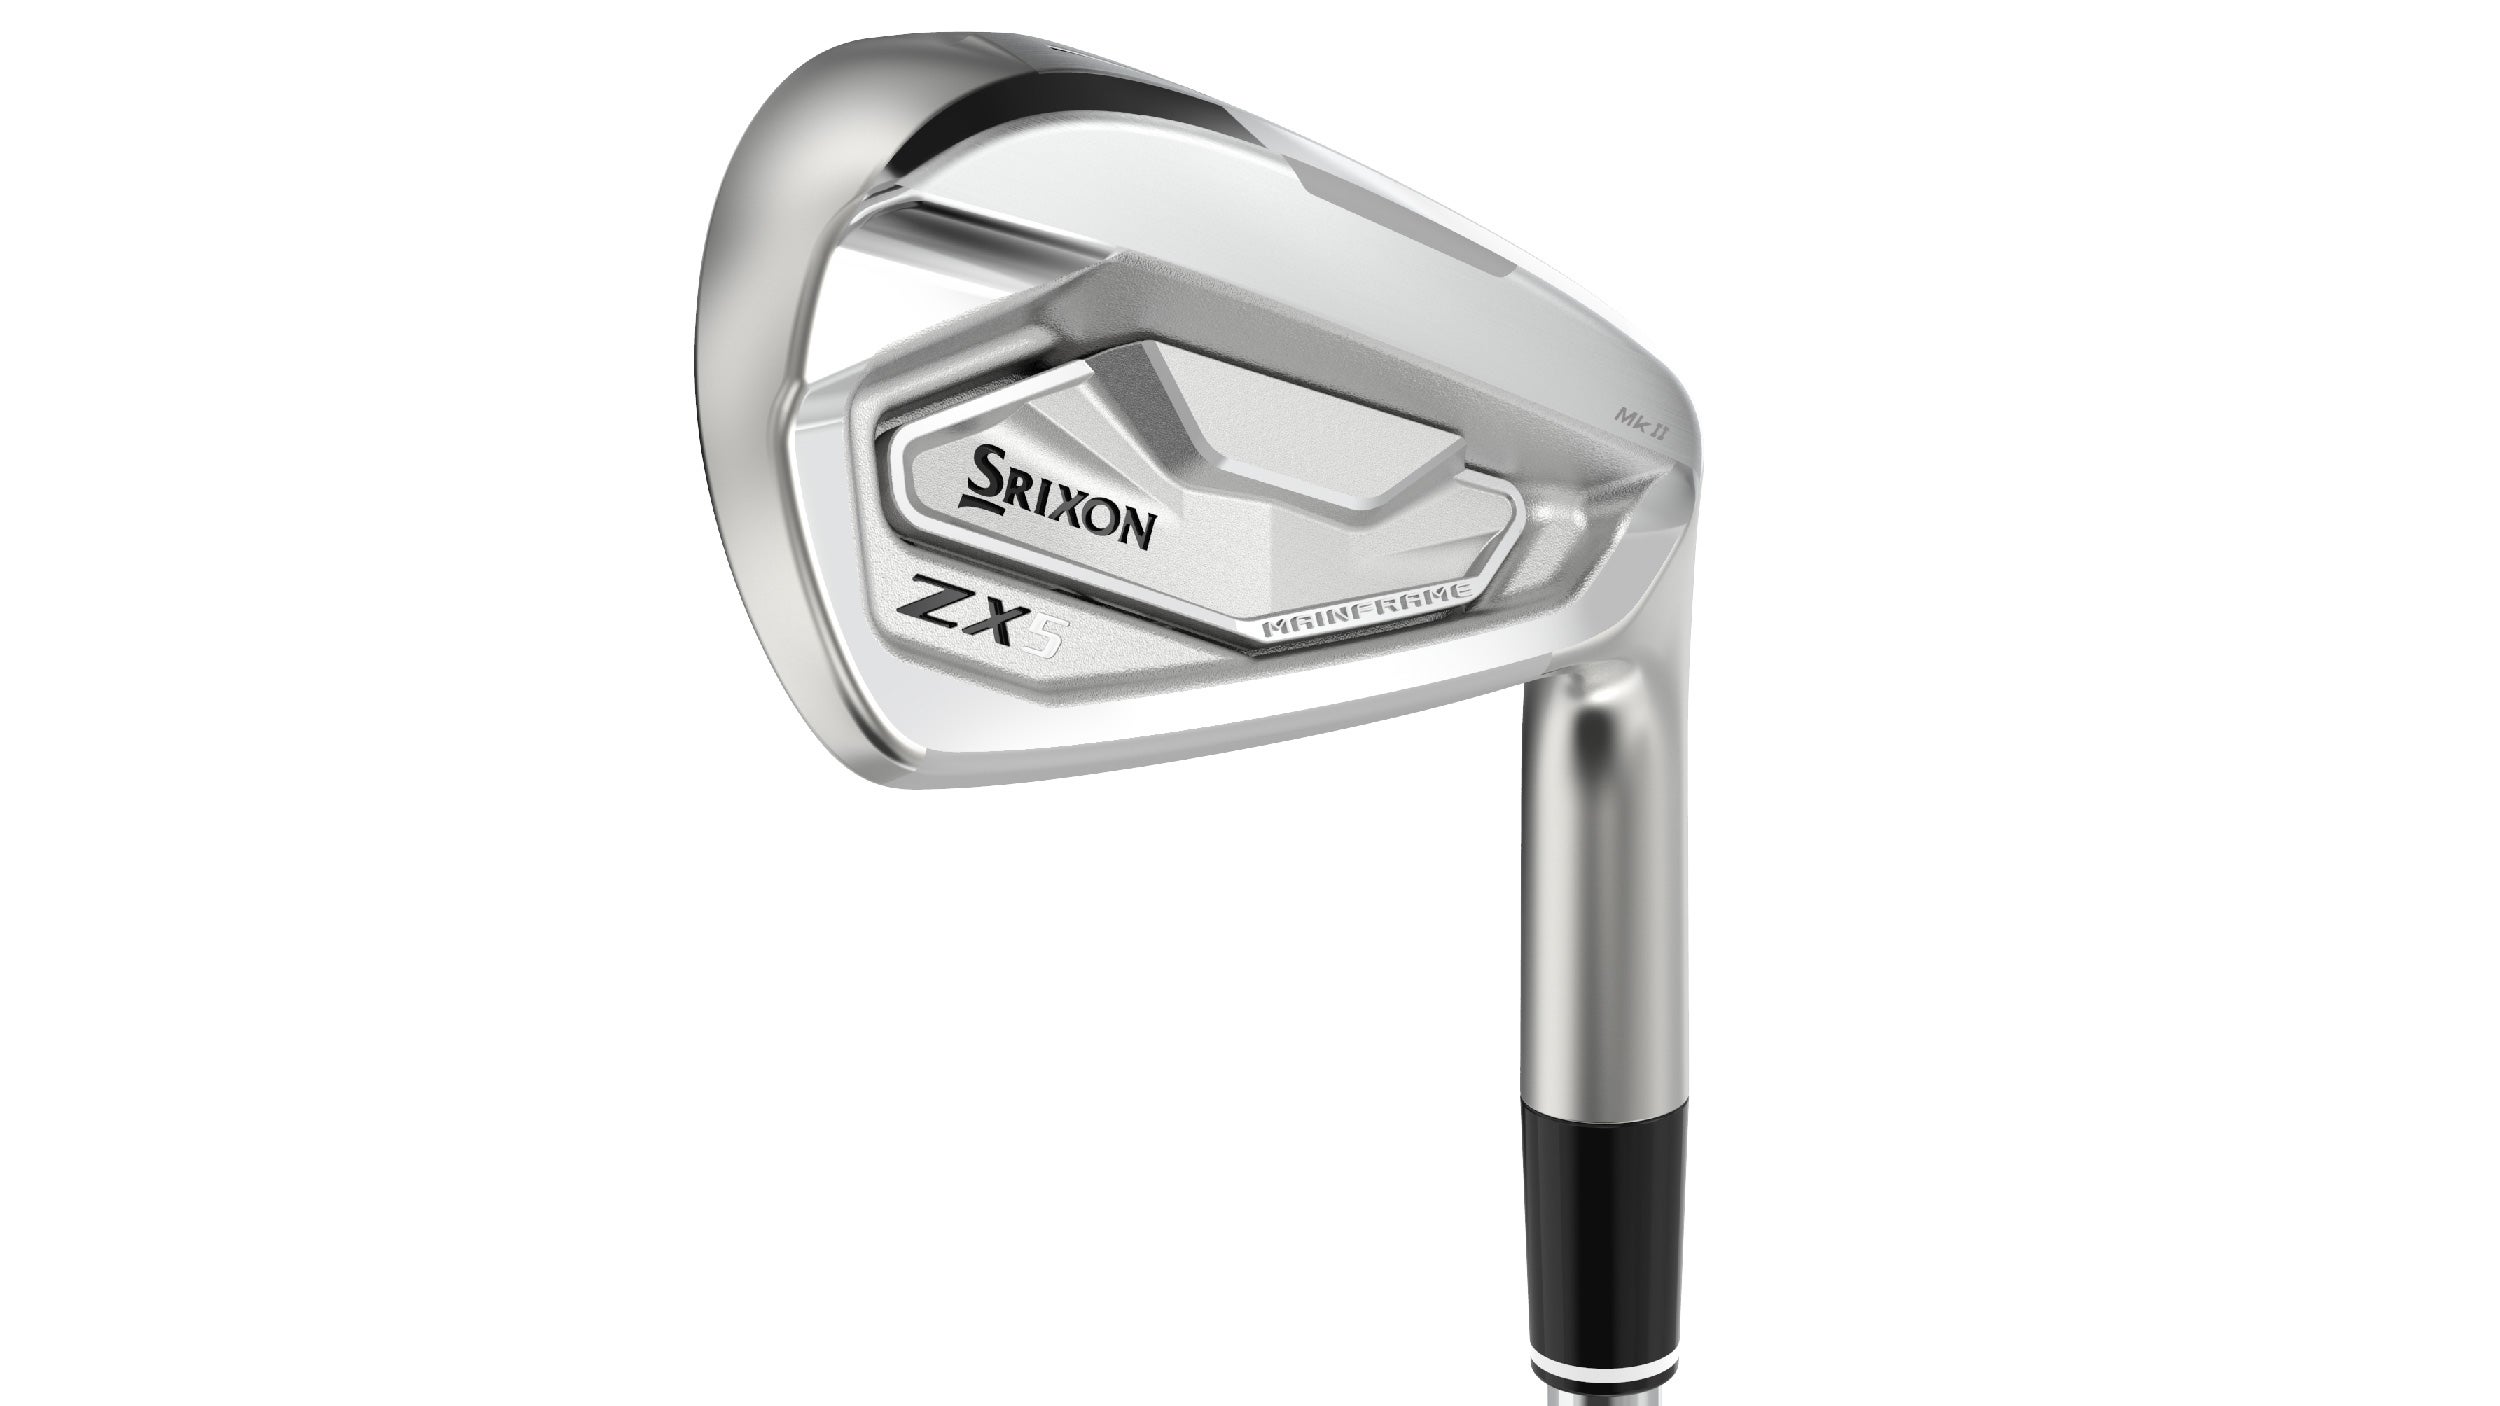 Srixon ZX MK II irons: Full reviews, robotic testing info and more